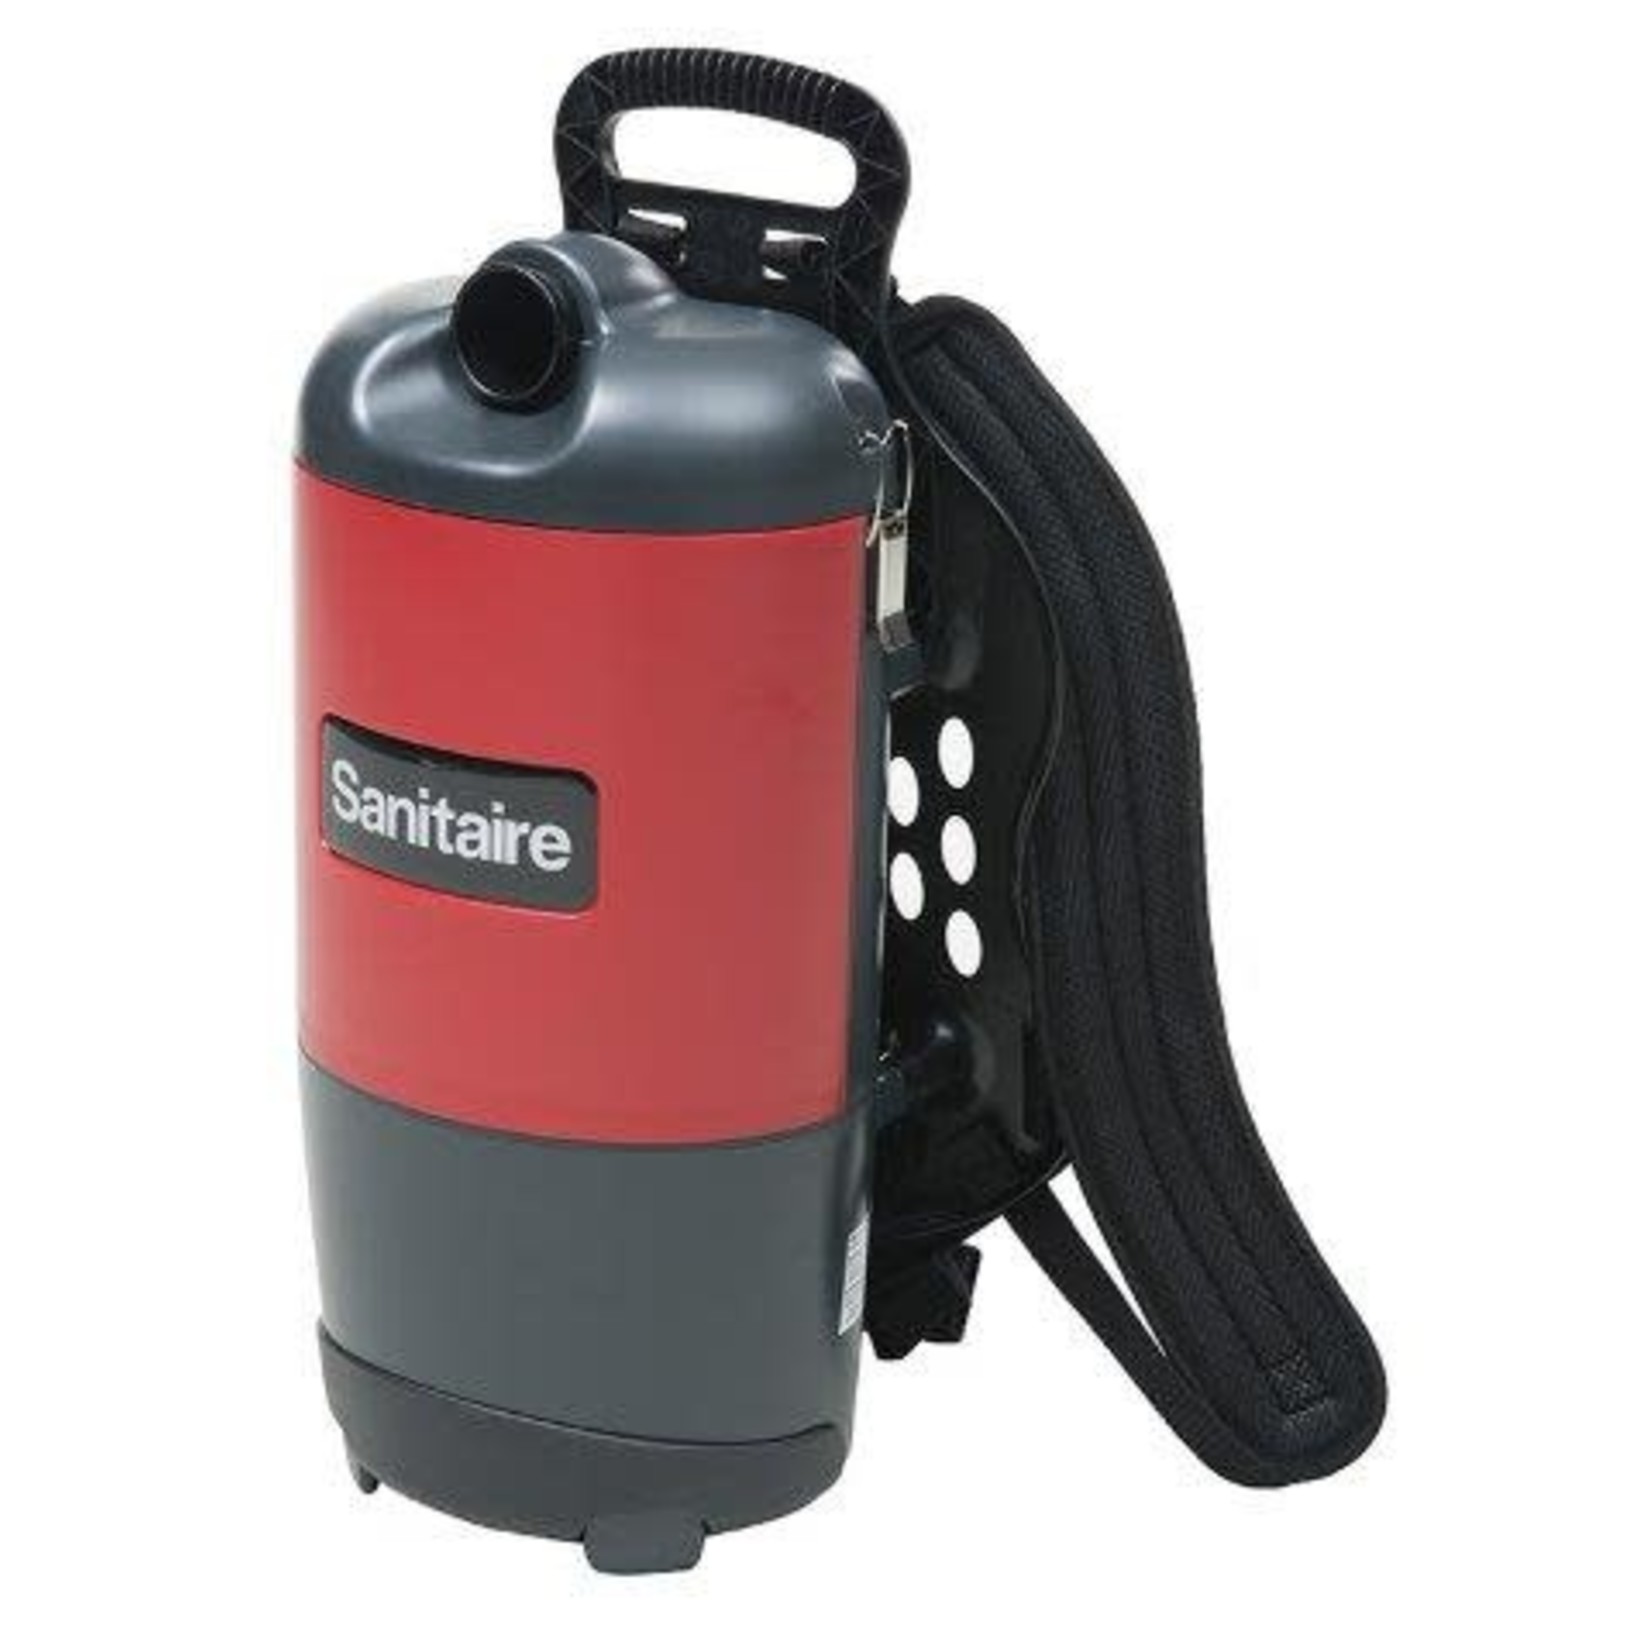 Sanitaire Sanitaire Backpack Vacuum with Accessories - SC412